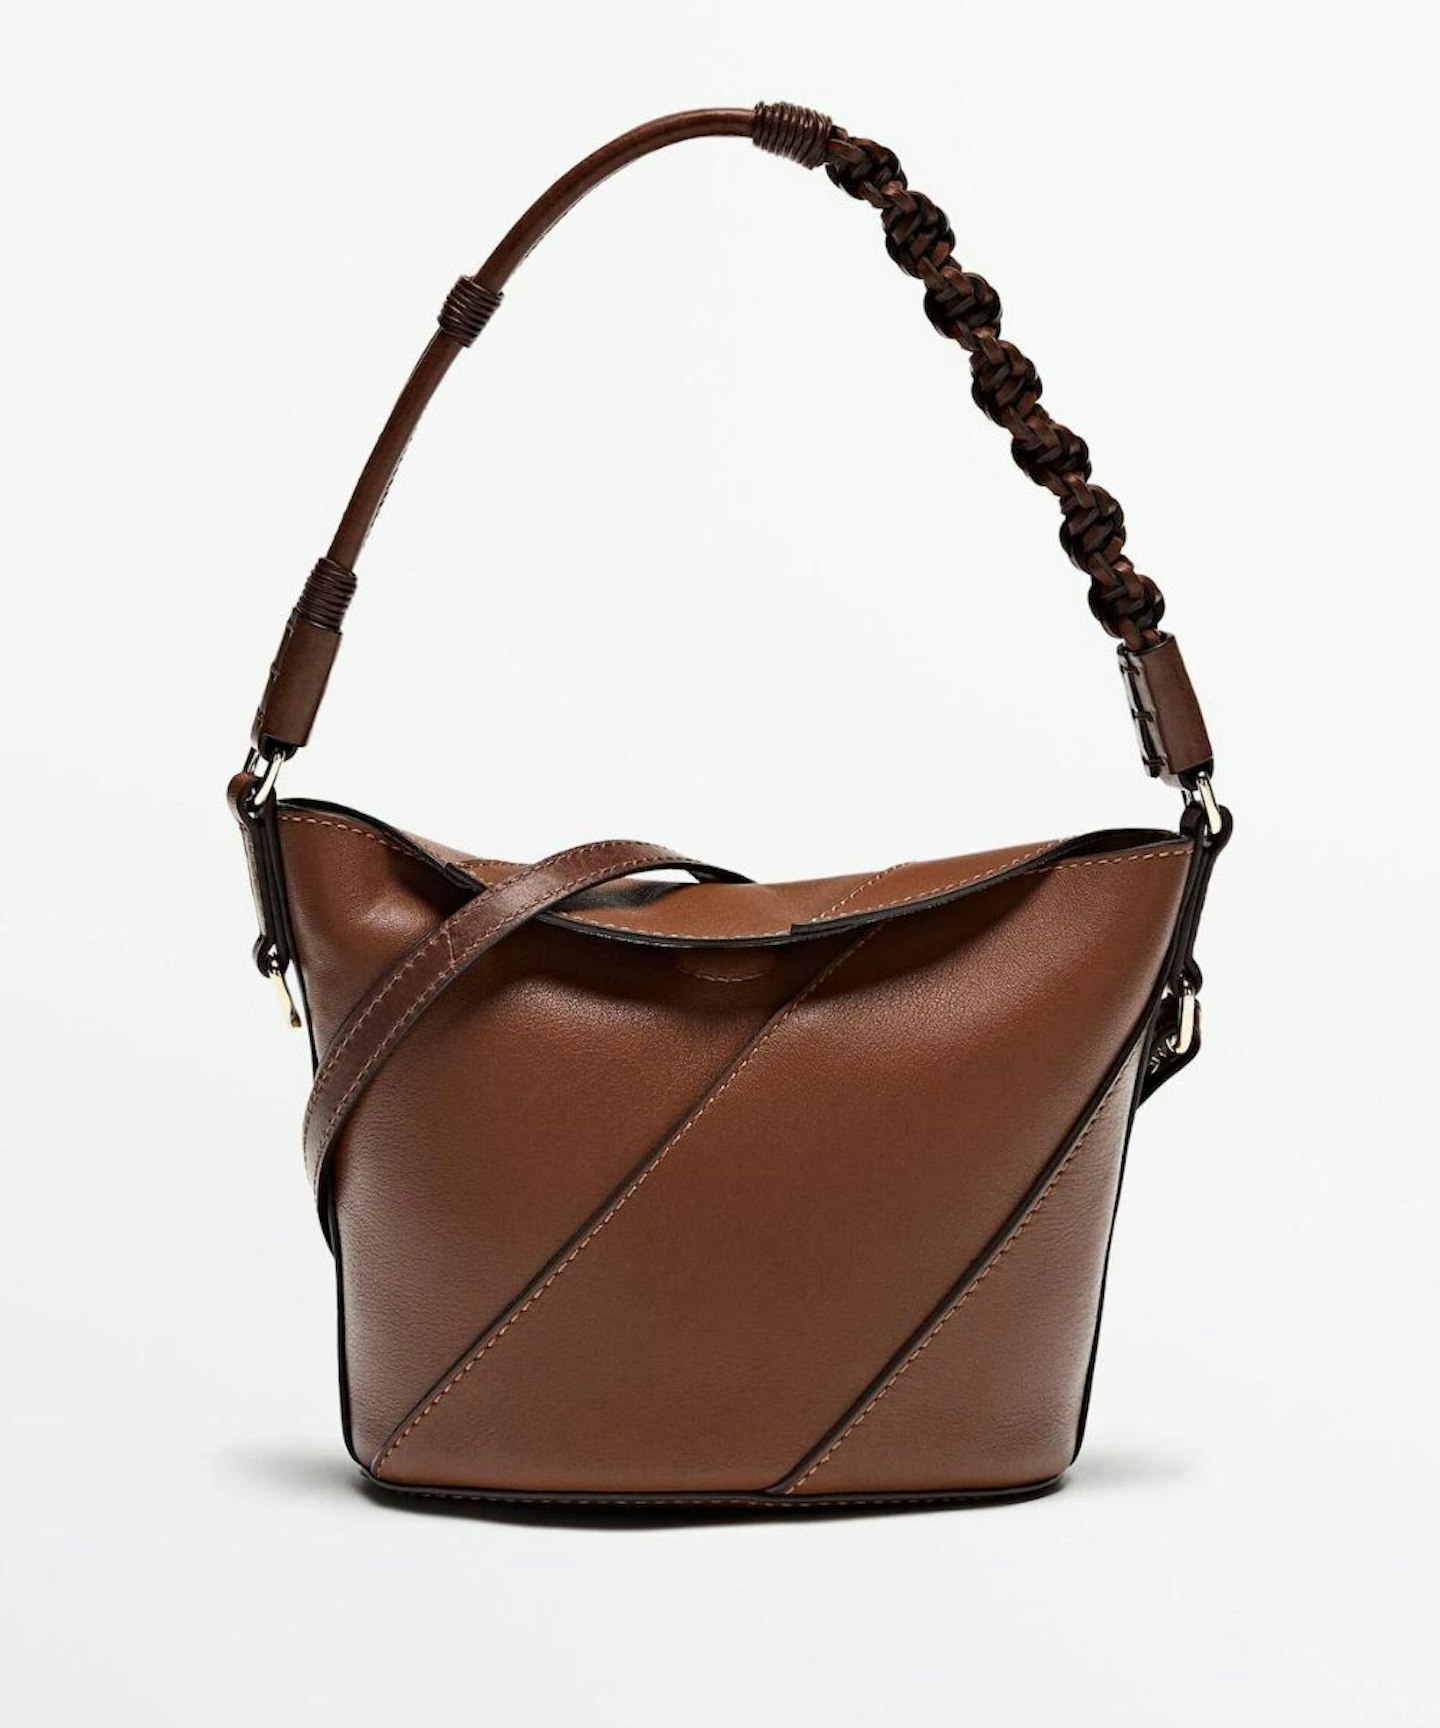 Napa Leather Crossbody Bag With Woven Strap